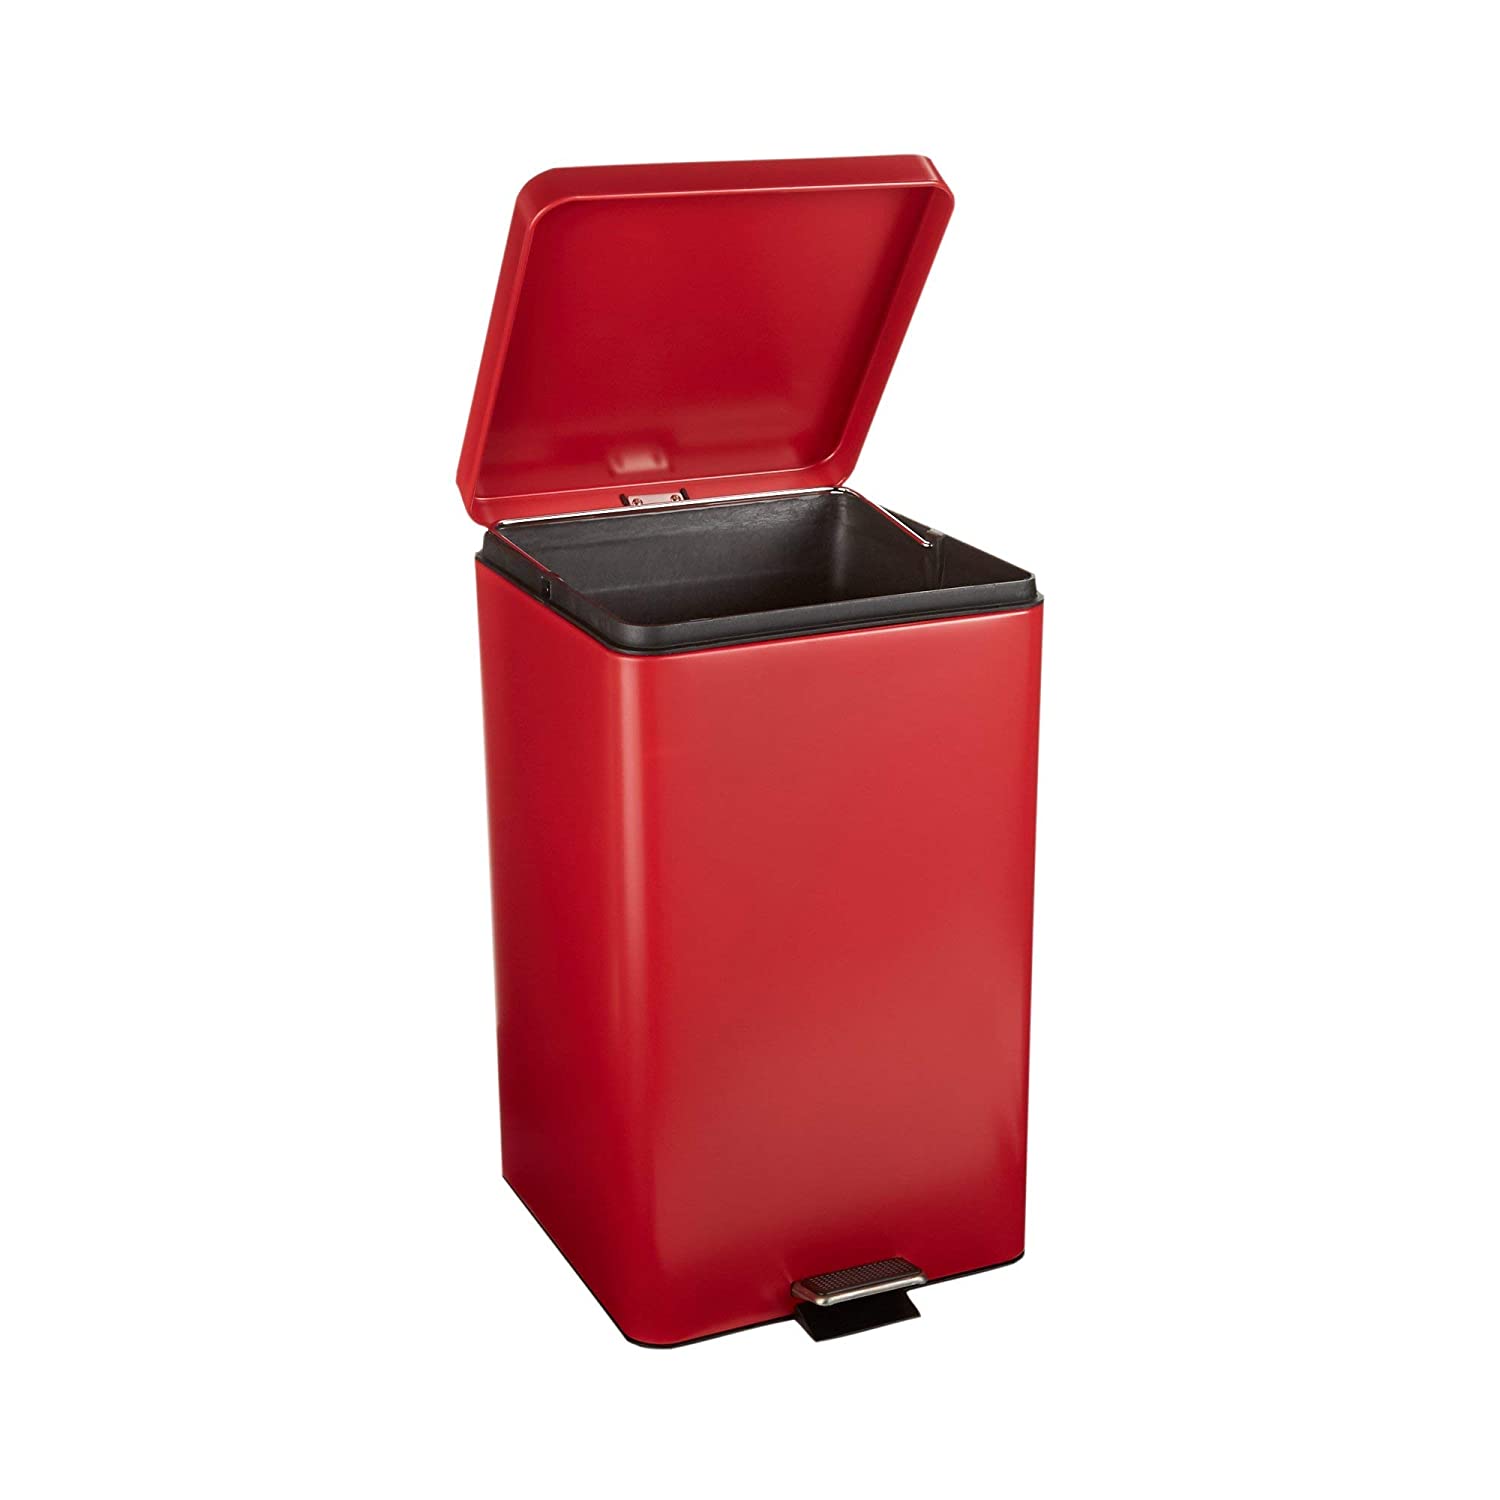 McKesson Steel Trash Can with Plastic Liner & Step On Opening - 32 Quart - Senior.com Trash Cans